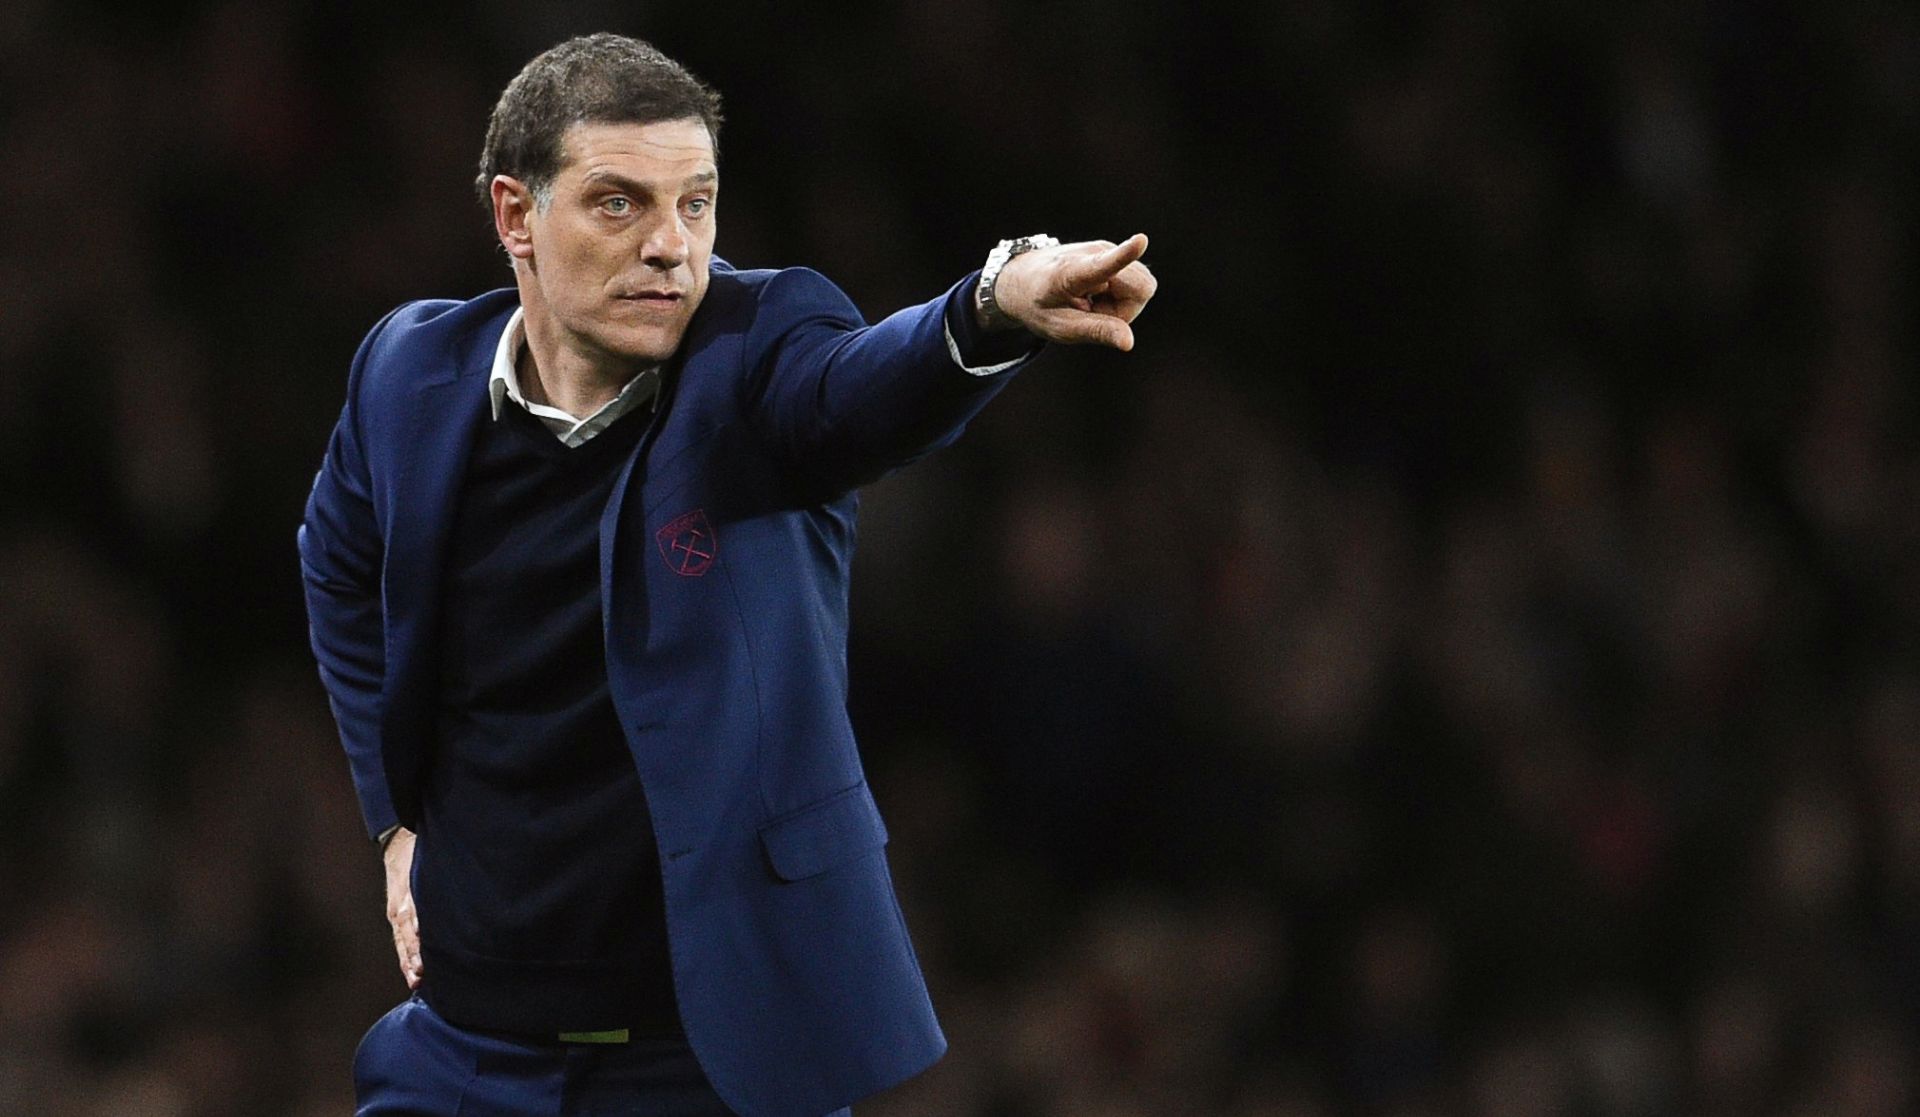 epa05891164 West Ham United manager Slaven Bilic reacts during the English Premier League soccer match between Arsenal FC and West Ham United in London, Britain, 05 April 2017.  